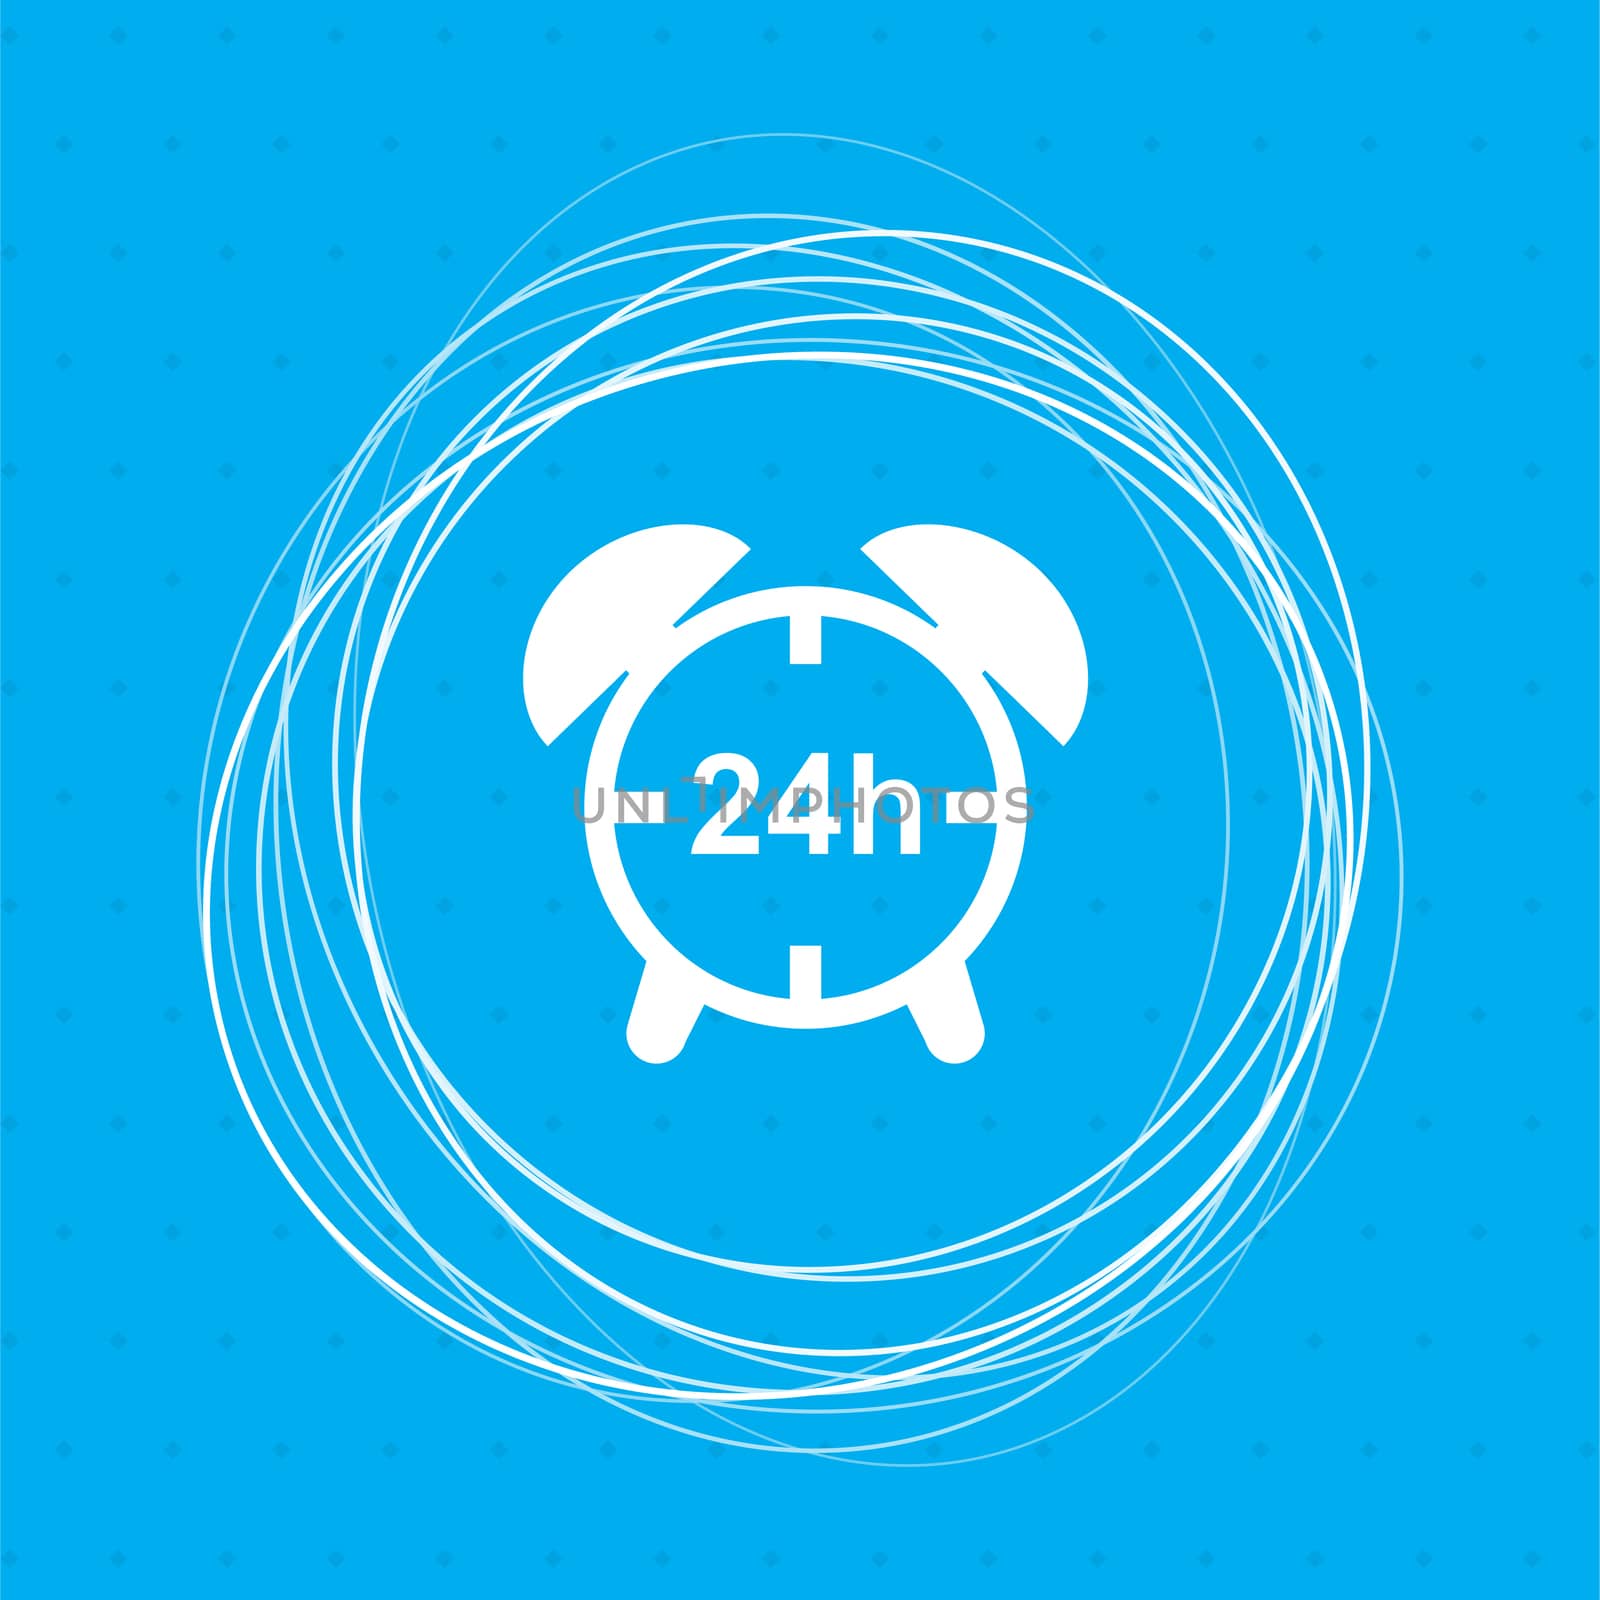 alarm clock icon on a blue background with abstract circles around and place for your text. illustration